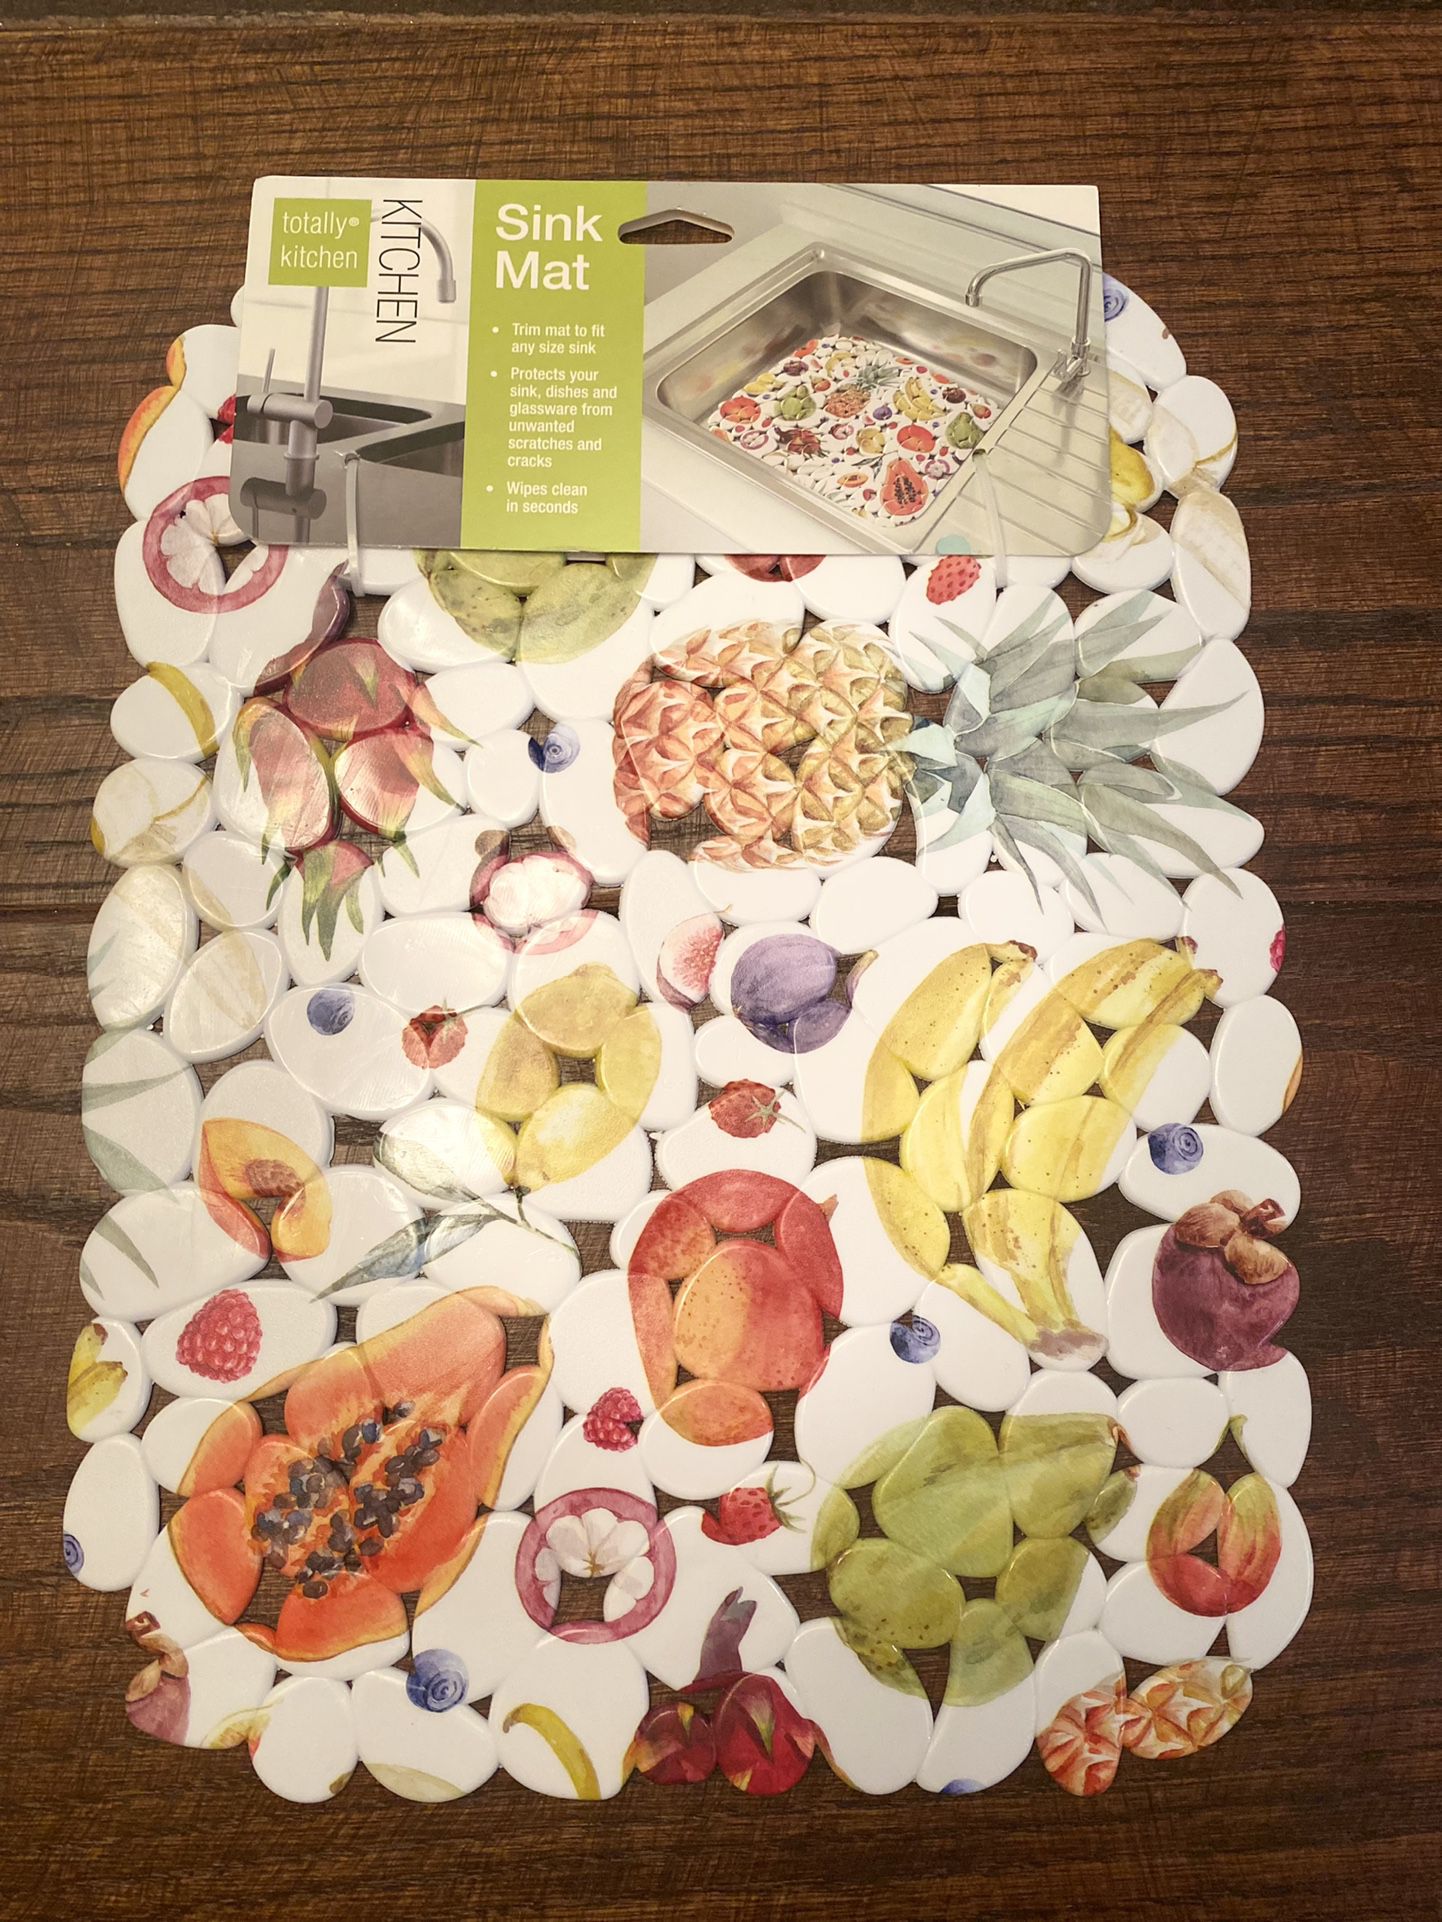 Sink Mat With A Tropical Fruit Theme By Totally Kitchen Protective Pebble Sink Mat